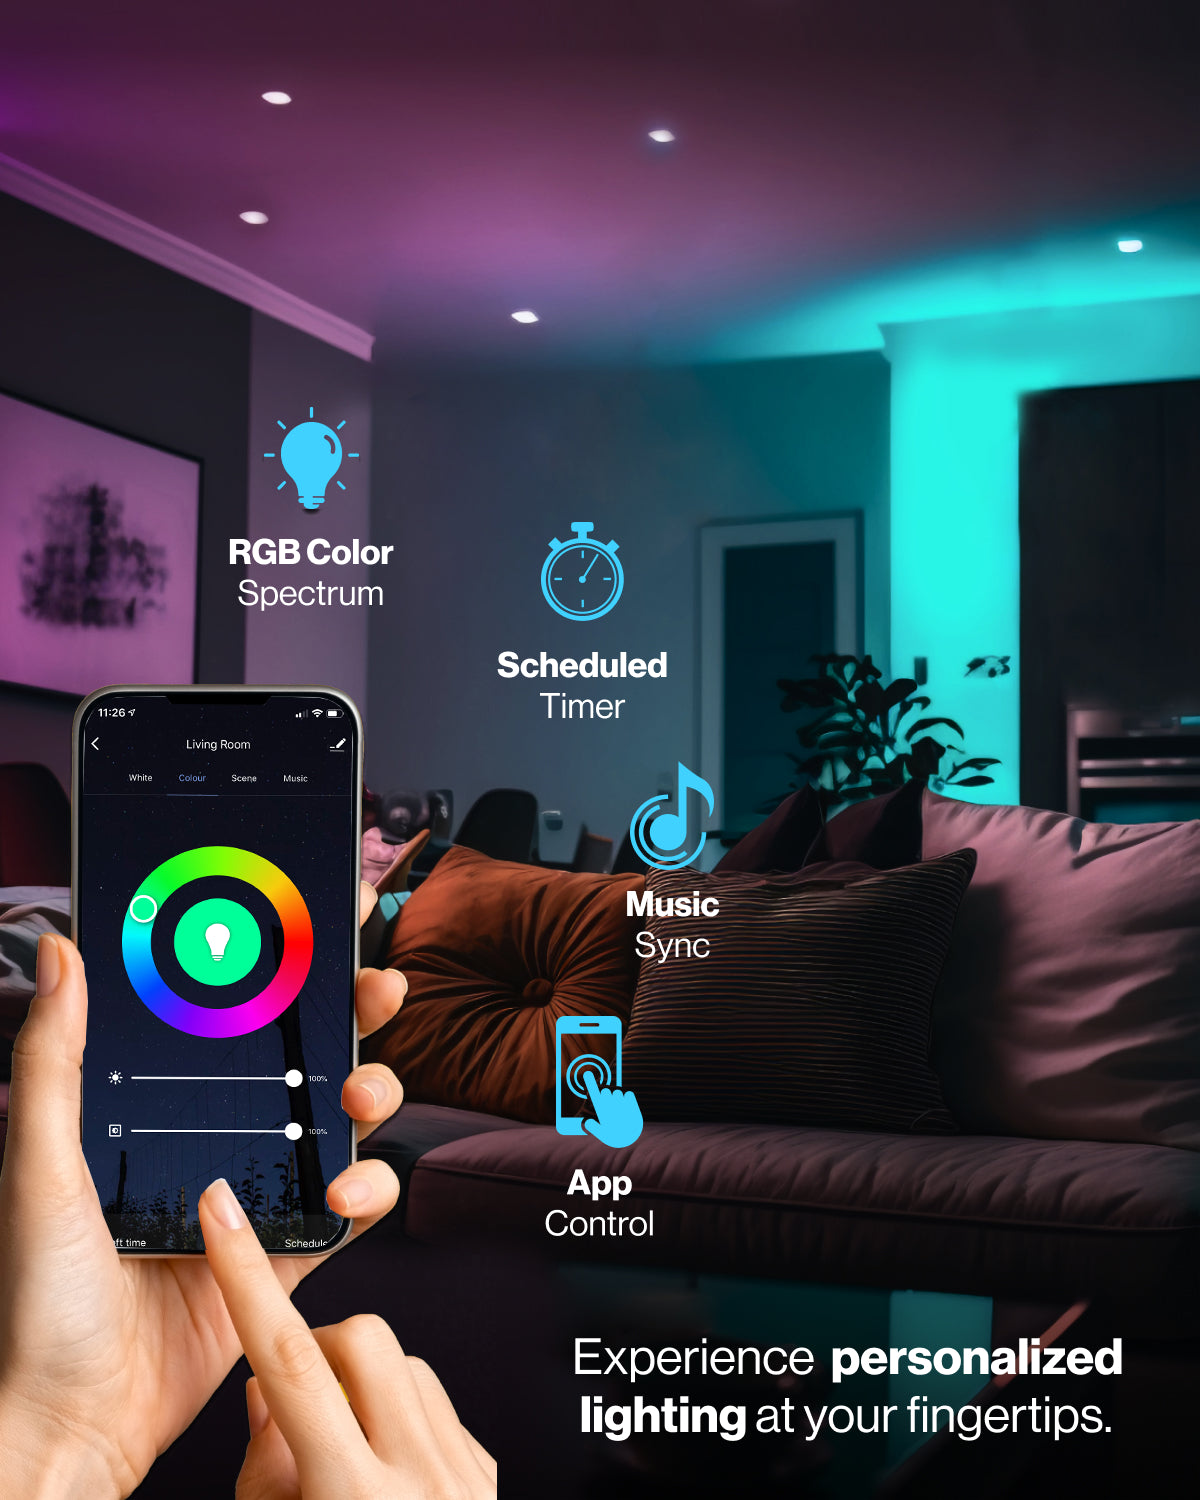 Easy to Use App. Customize light bulb settings. You can custom control your CCT white light color temperature with the app, control the app remotely with your phone – even if you are not at home – and customize the dimming or brightness of the light bulb. Adjust scheduling of each BR30 bulb for on or off times that you set in the app. Set a scene to change the mood and use music sync to change the light color based on the beat of your music.